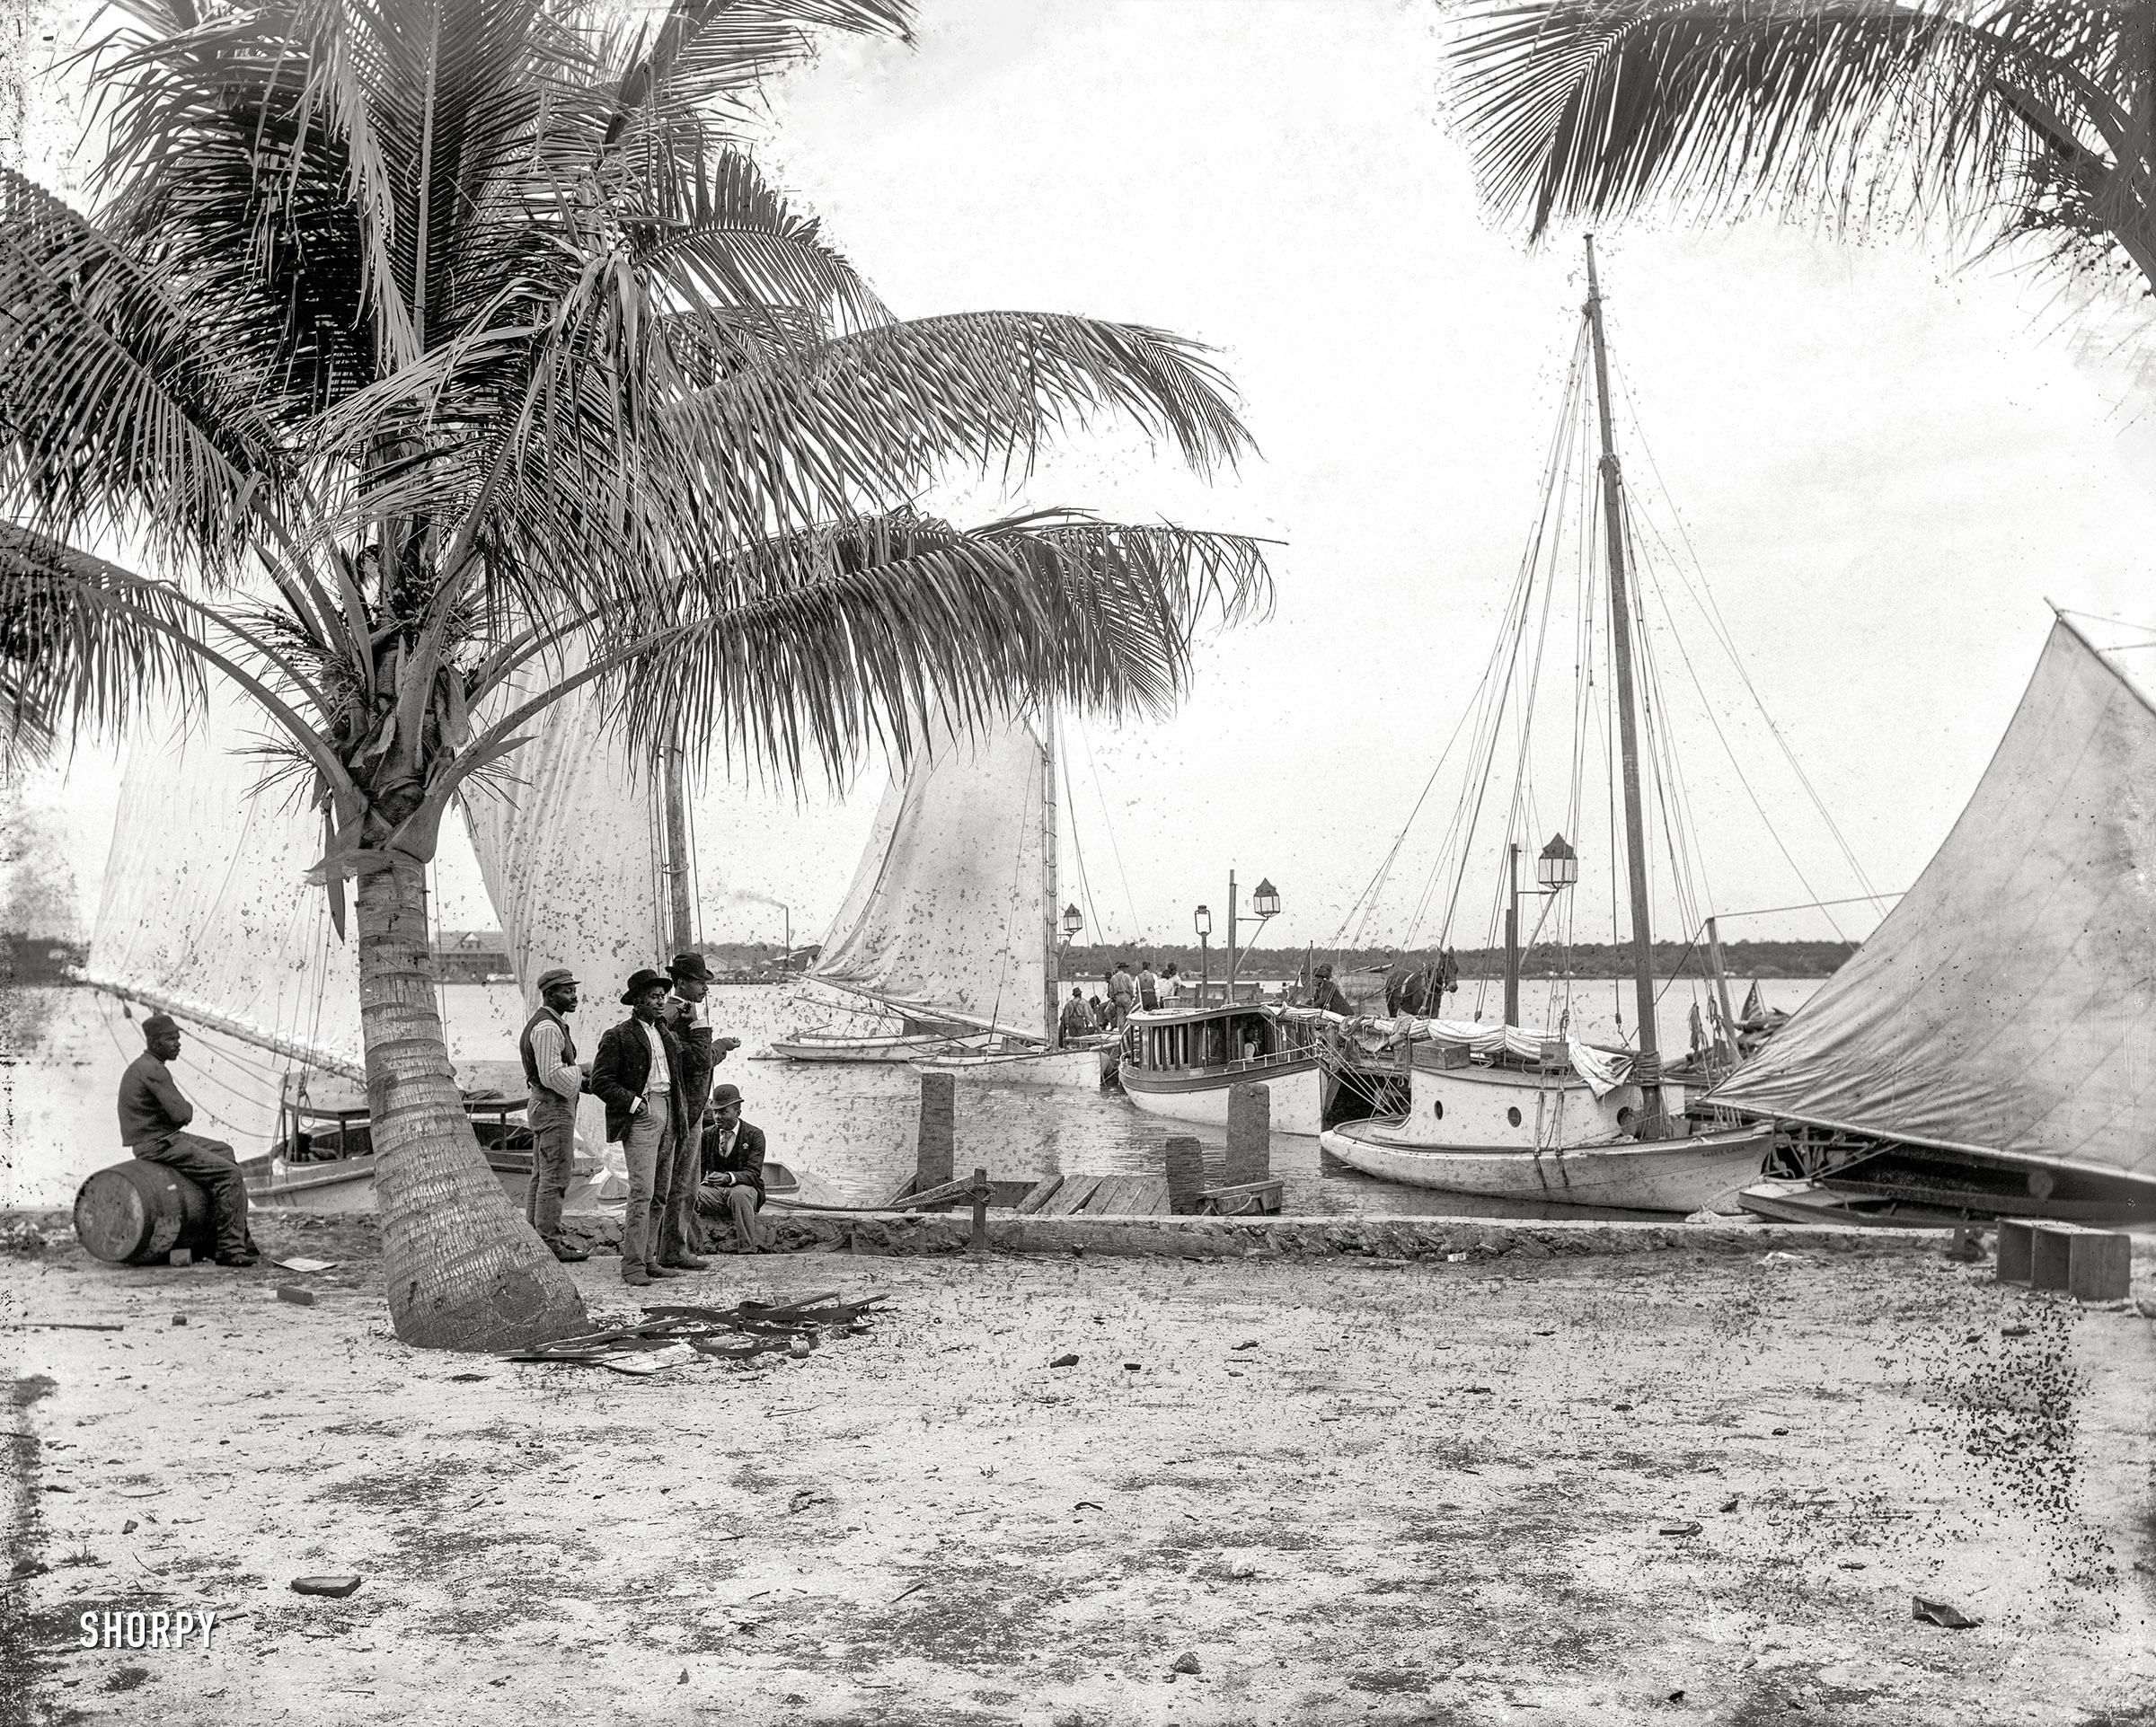 Florida circa 1897. "The landing at Palm Beach." 8x10 inch dry plate glass negative by William Henry Jackson, Detroit Photographic Company. View full size.